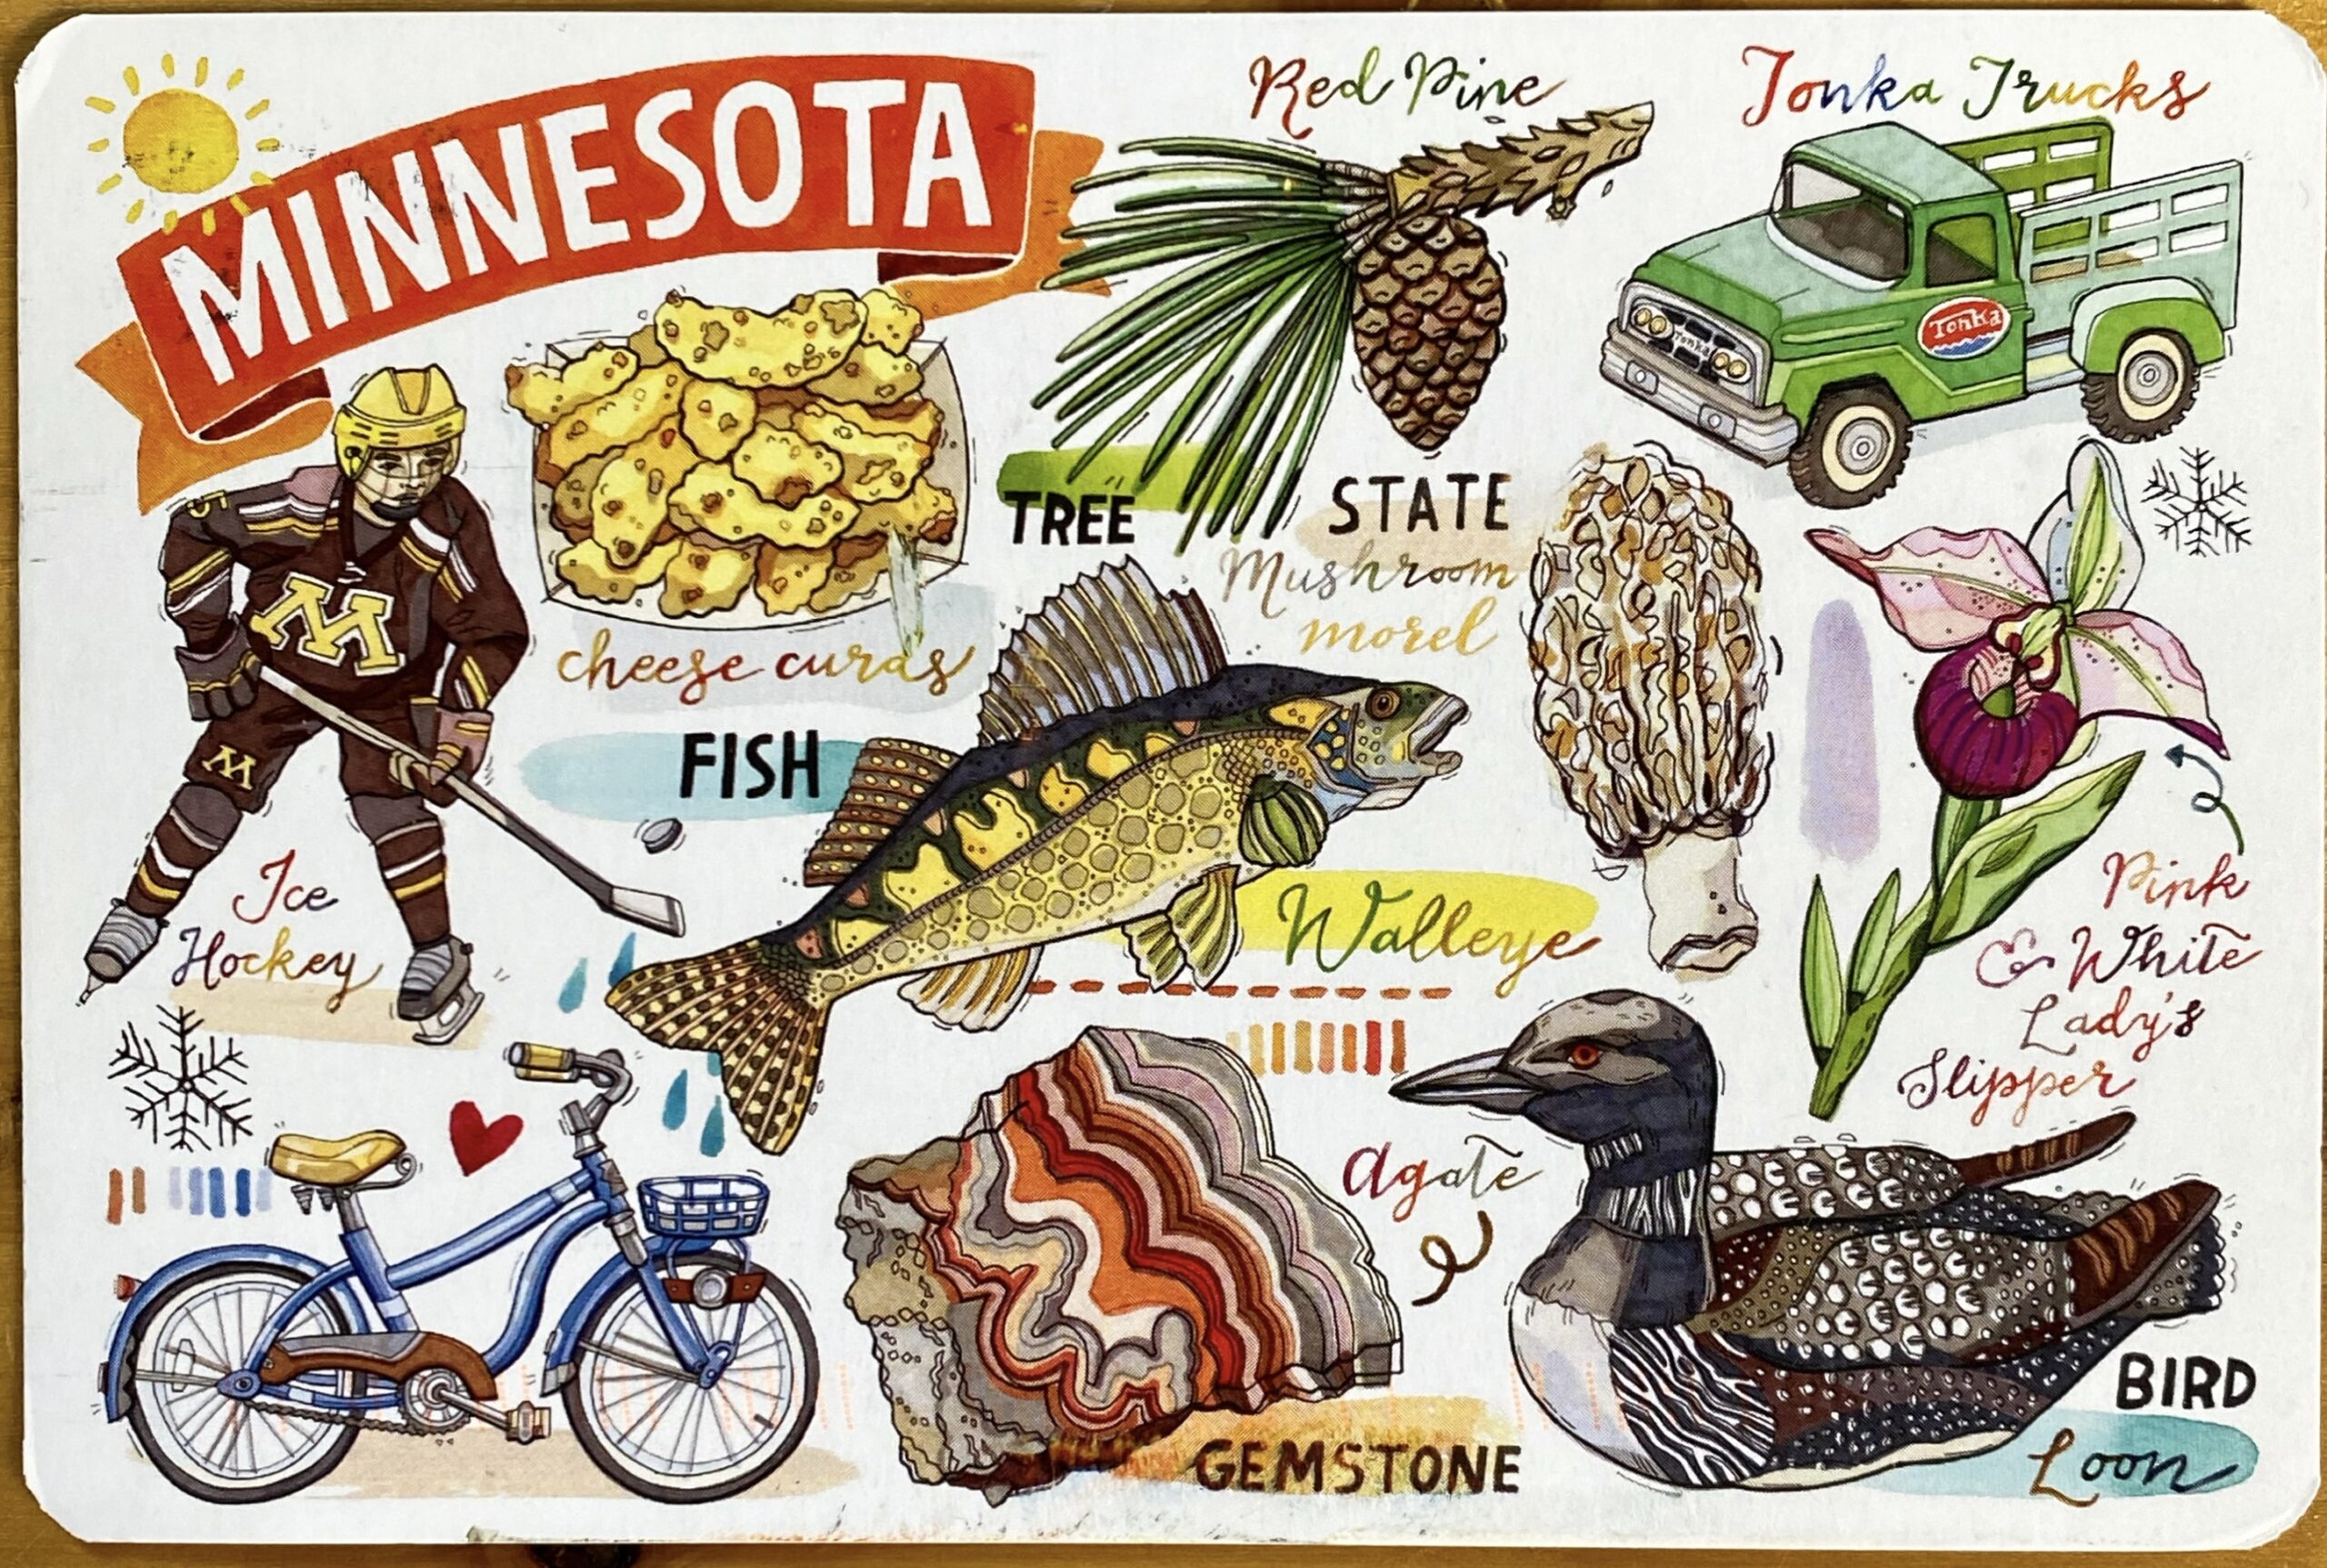 Postcard from Minnesota, received August 5 2022